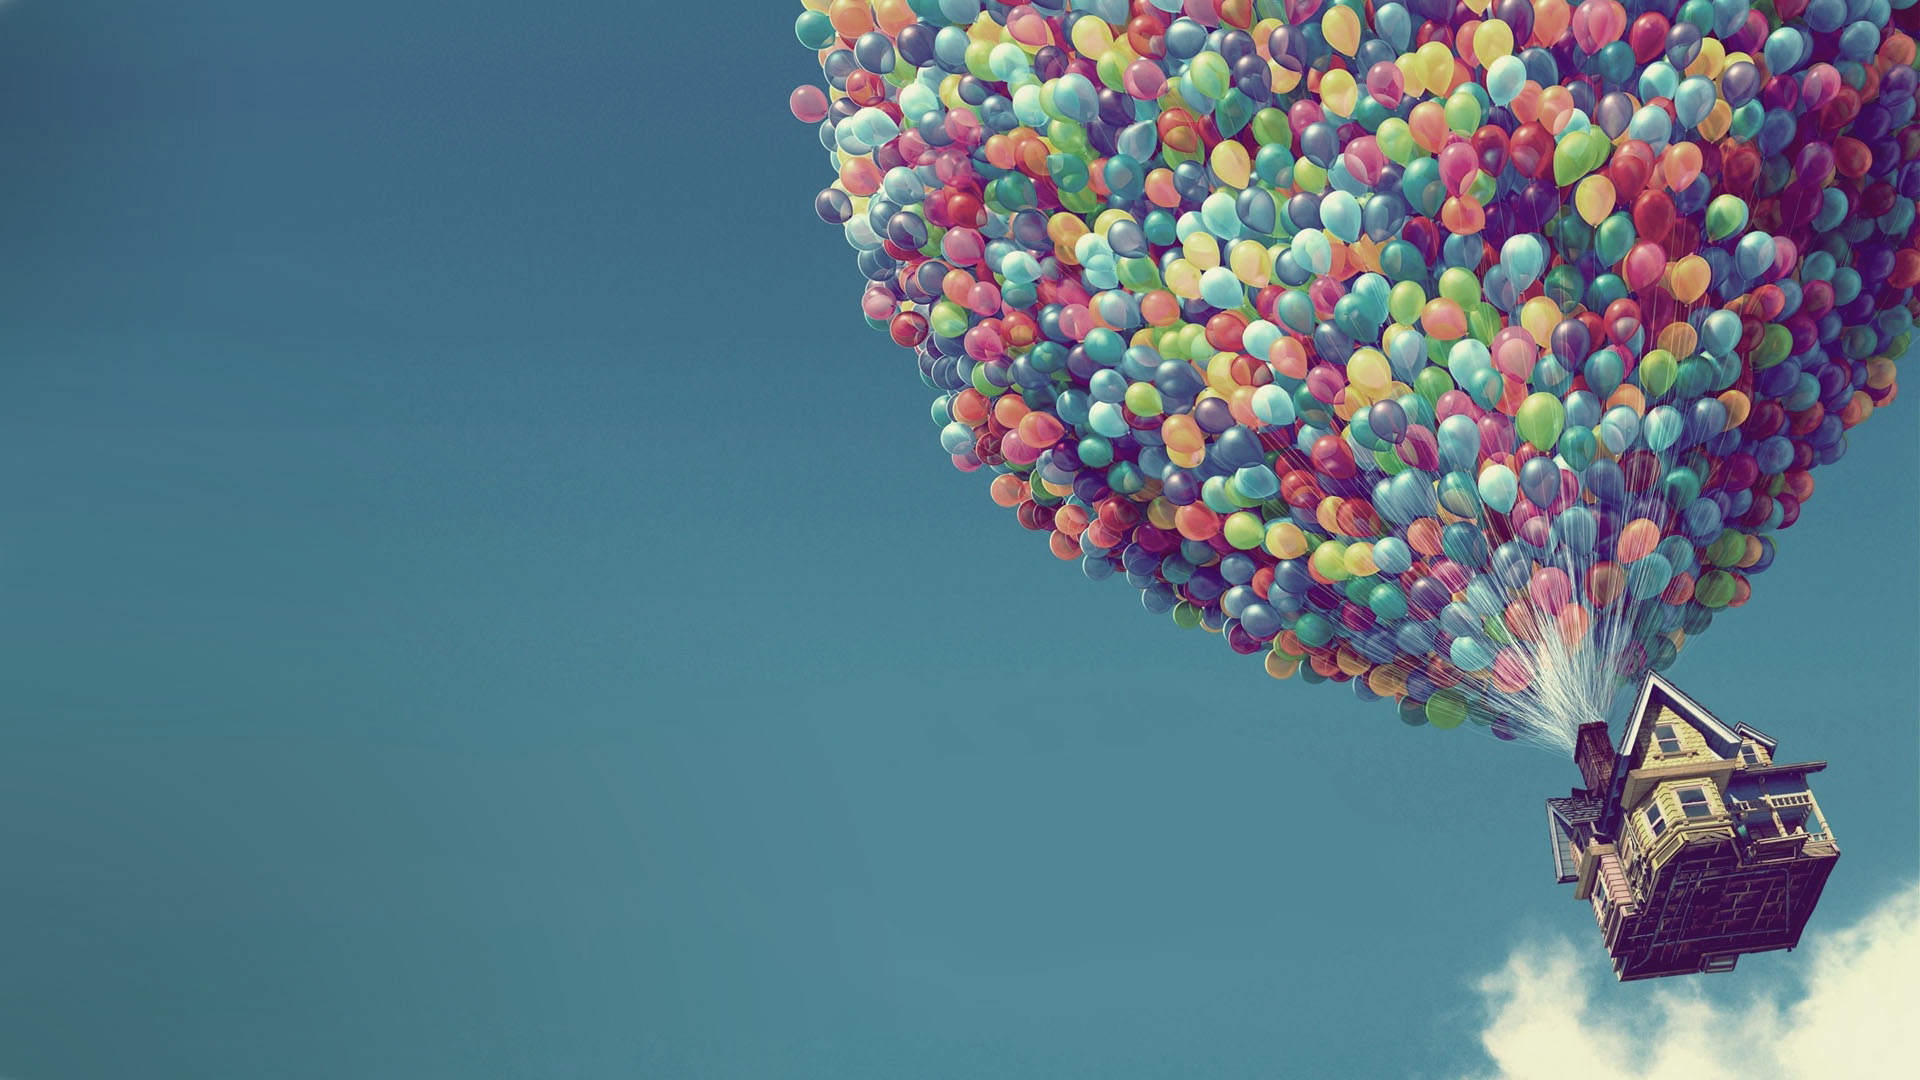 Pixar Cartoon Full HD Wallpaper Balloons And The House In Sky